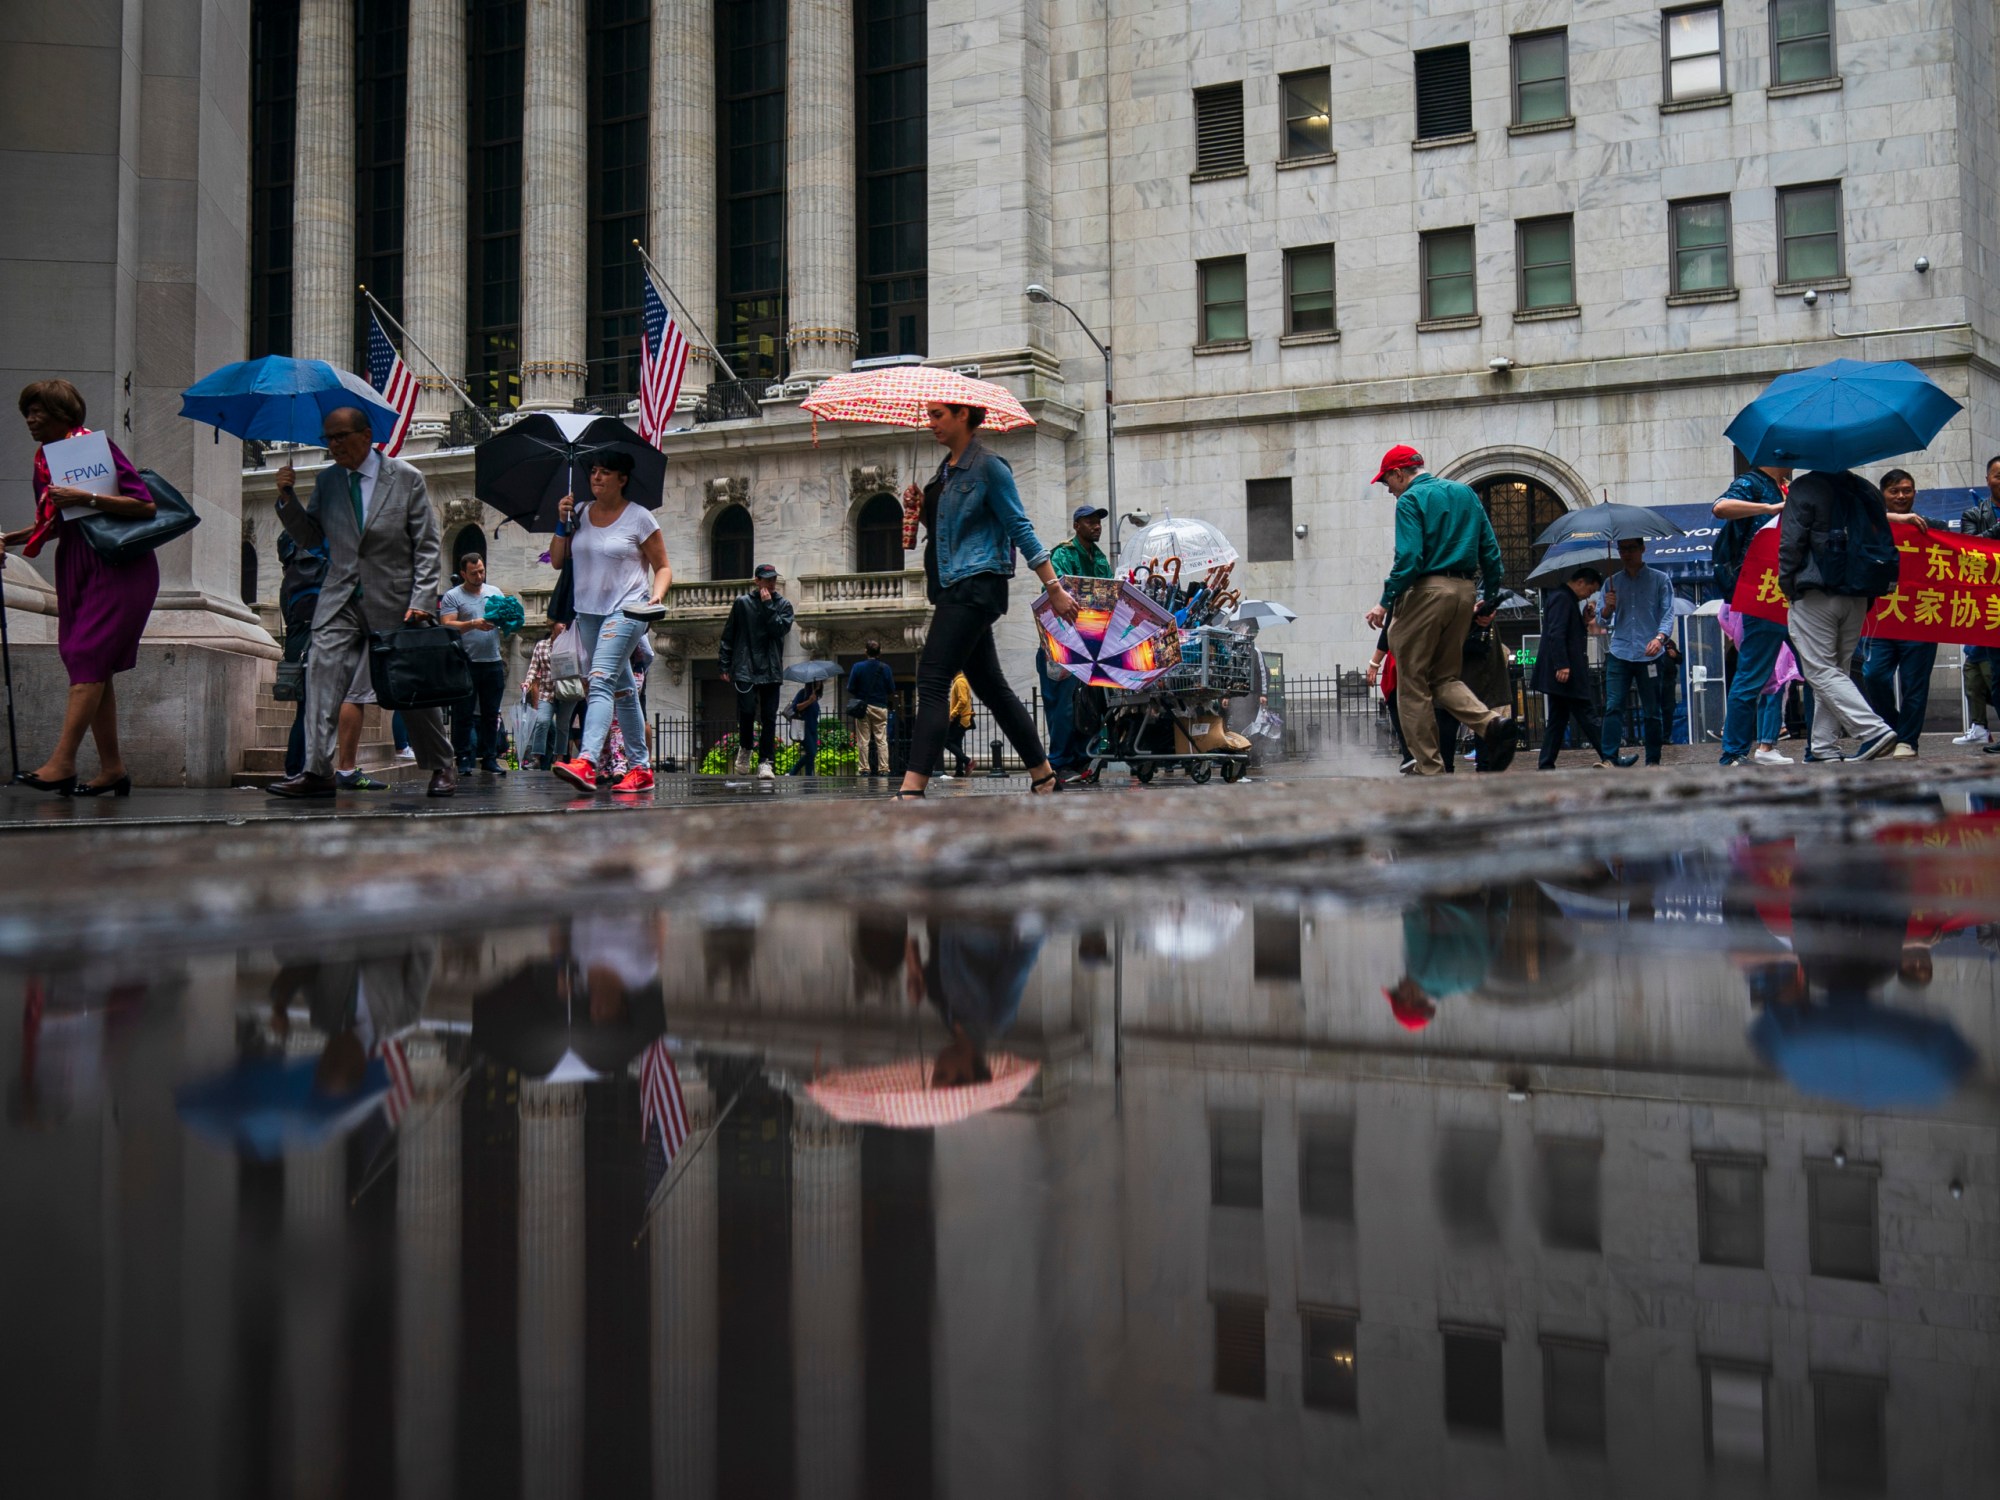 People walk past the New York Stock Exchange on a rainy day in the Financial District, October 2018, in New York City. (Getty/Drew Angerer)